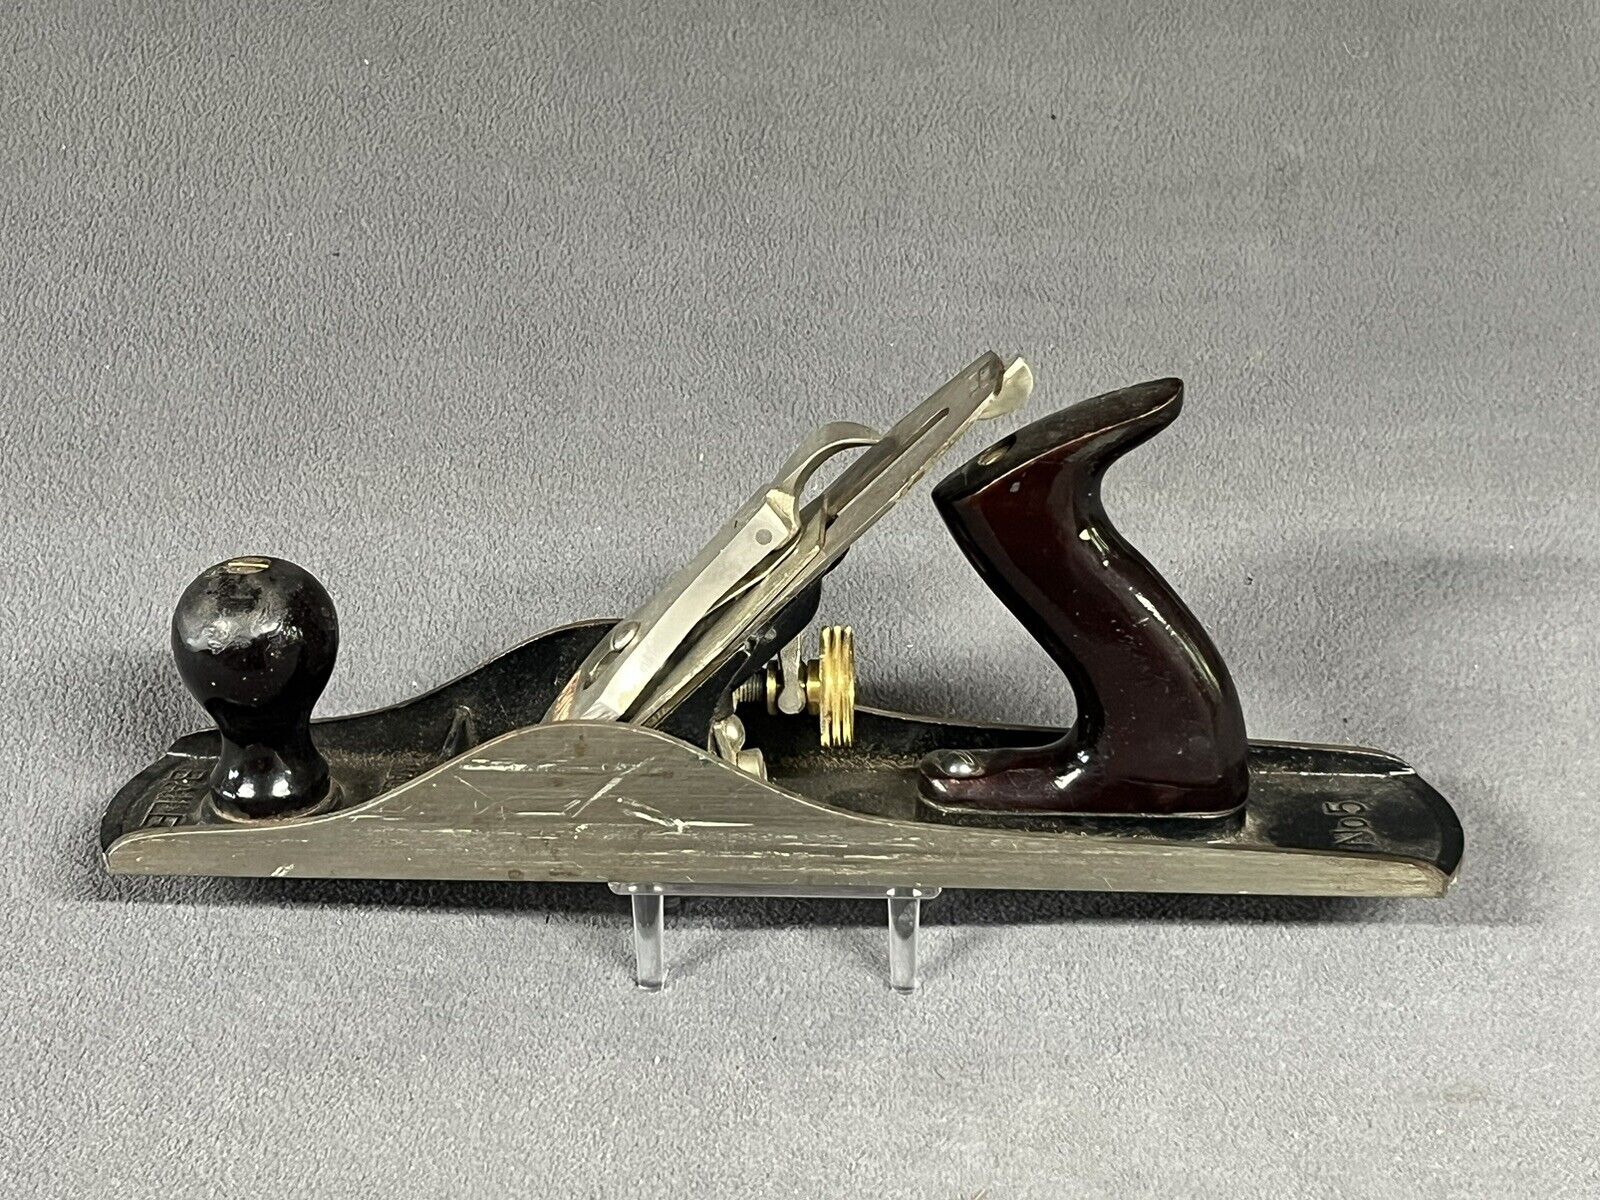 Stanley Bailey Number 5 Plane